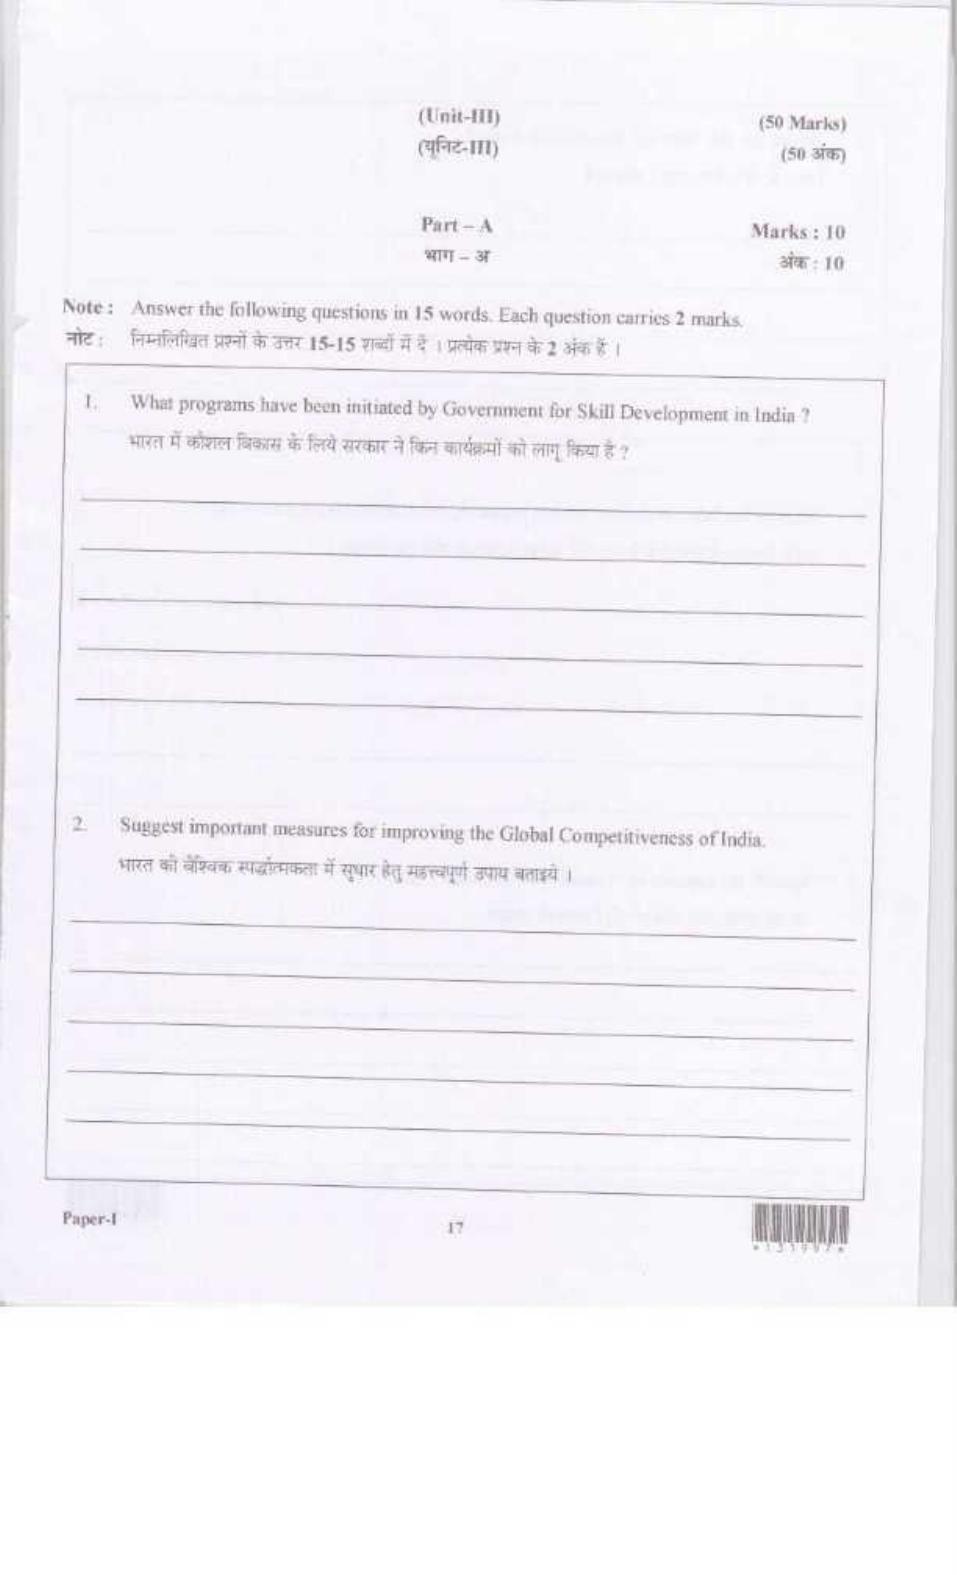 LUVAS Non-Teaching Sample Papers - Socio-Economic and Experience - Page 11